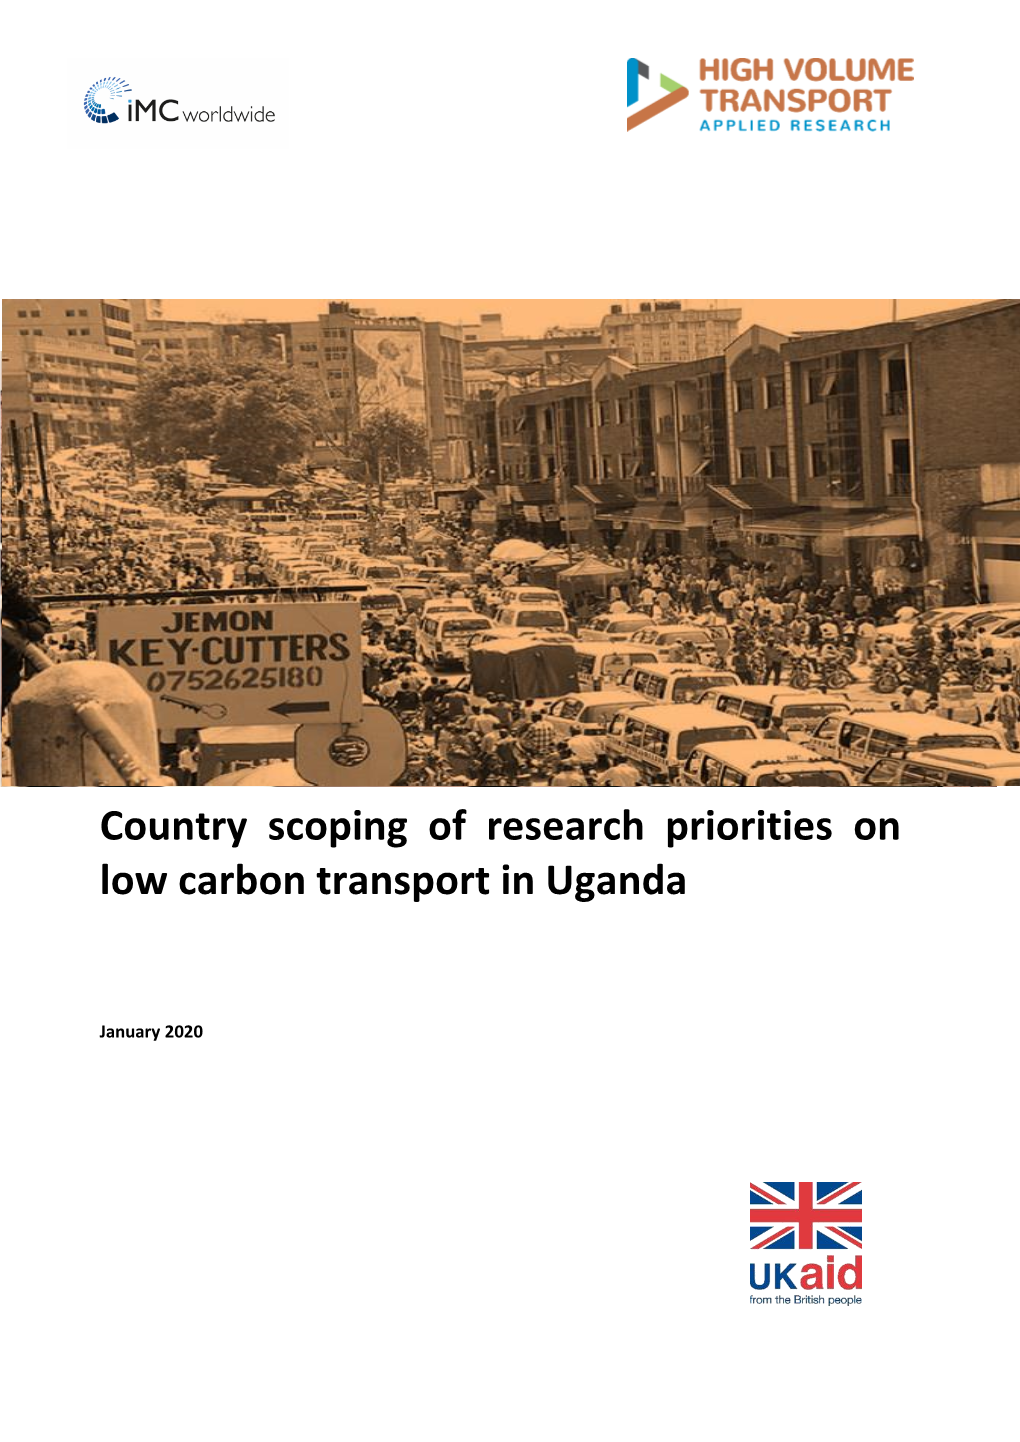 Country Scoping of Research Priorities on Low Carbon Transport in Uganda